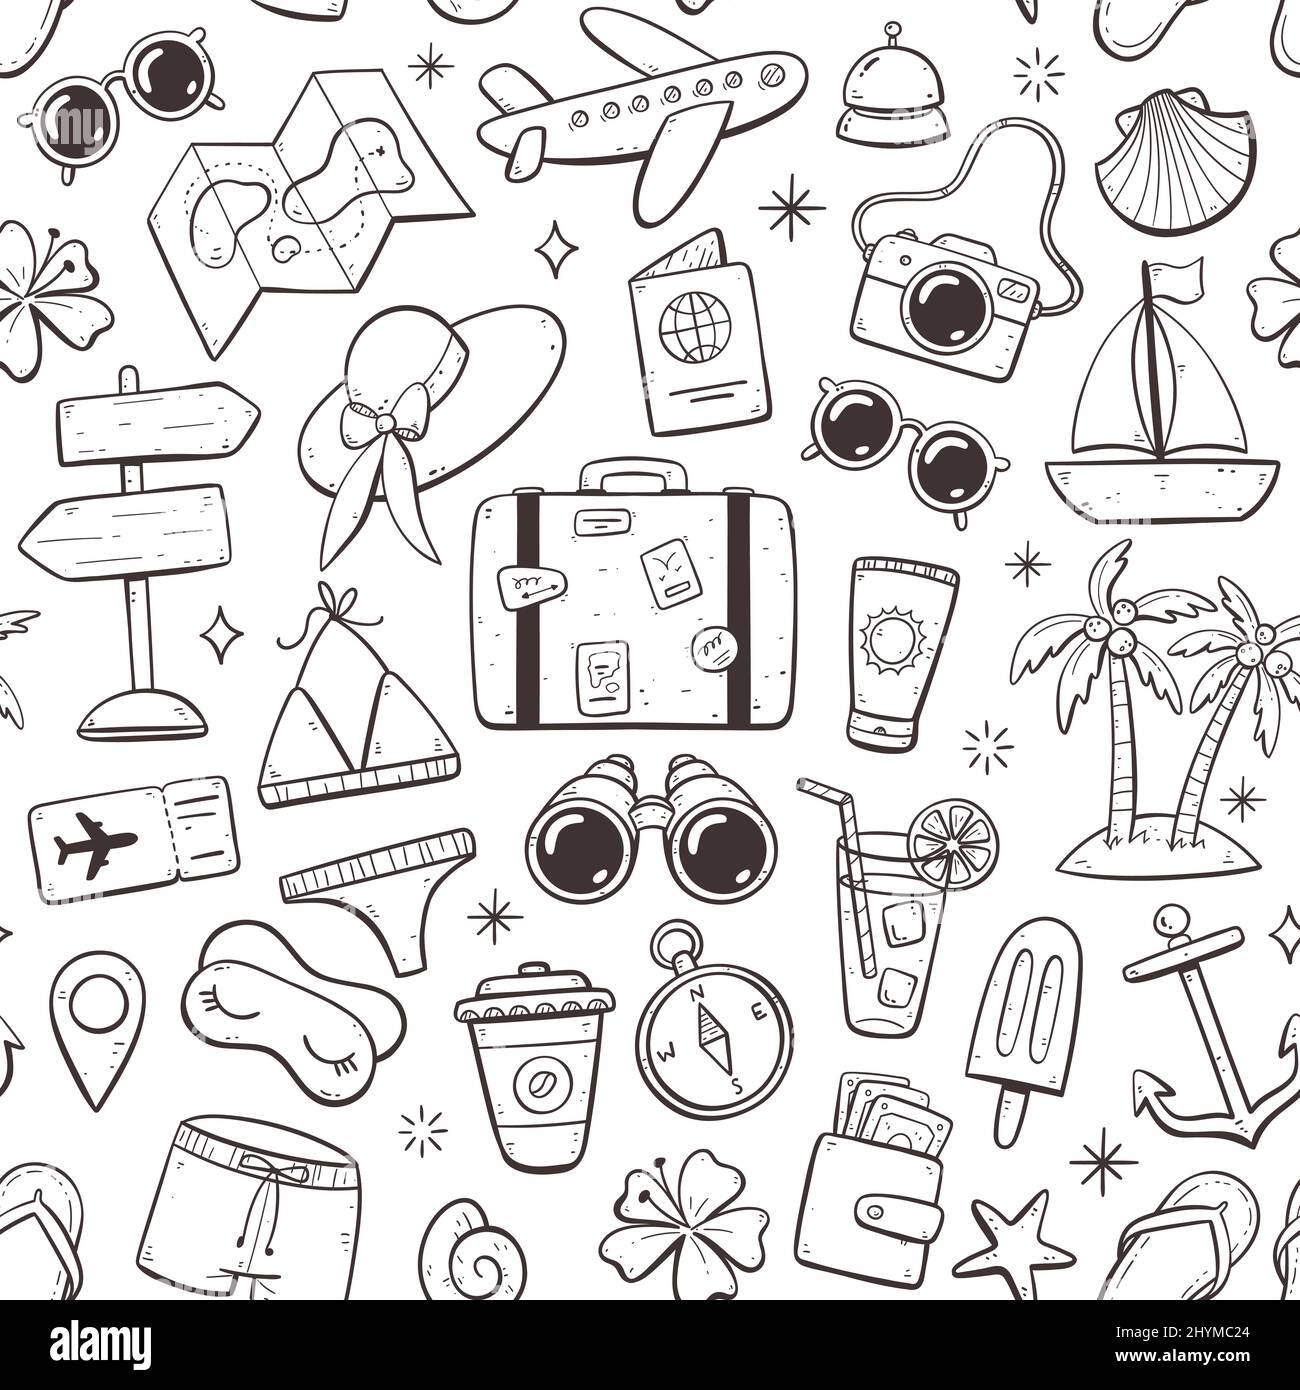 Pattern design with summer and holidays objects. Isolated elements on white background. Doodle version. Stock Vector